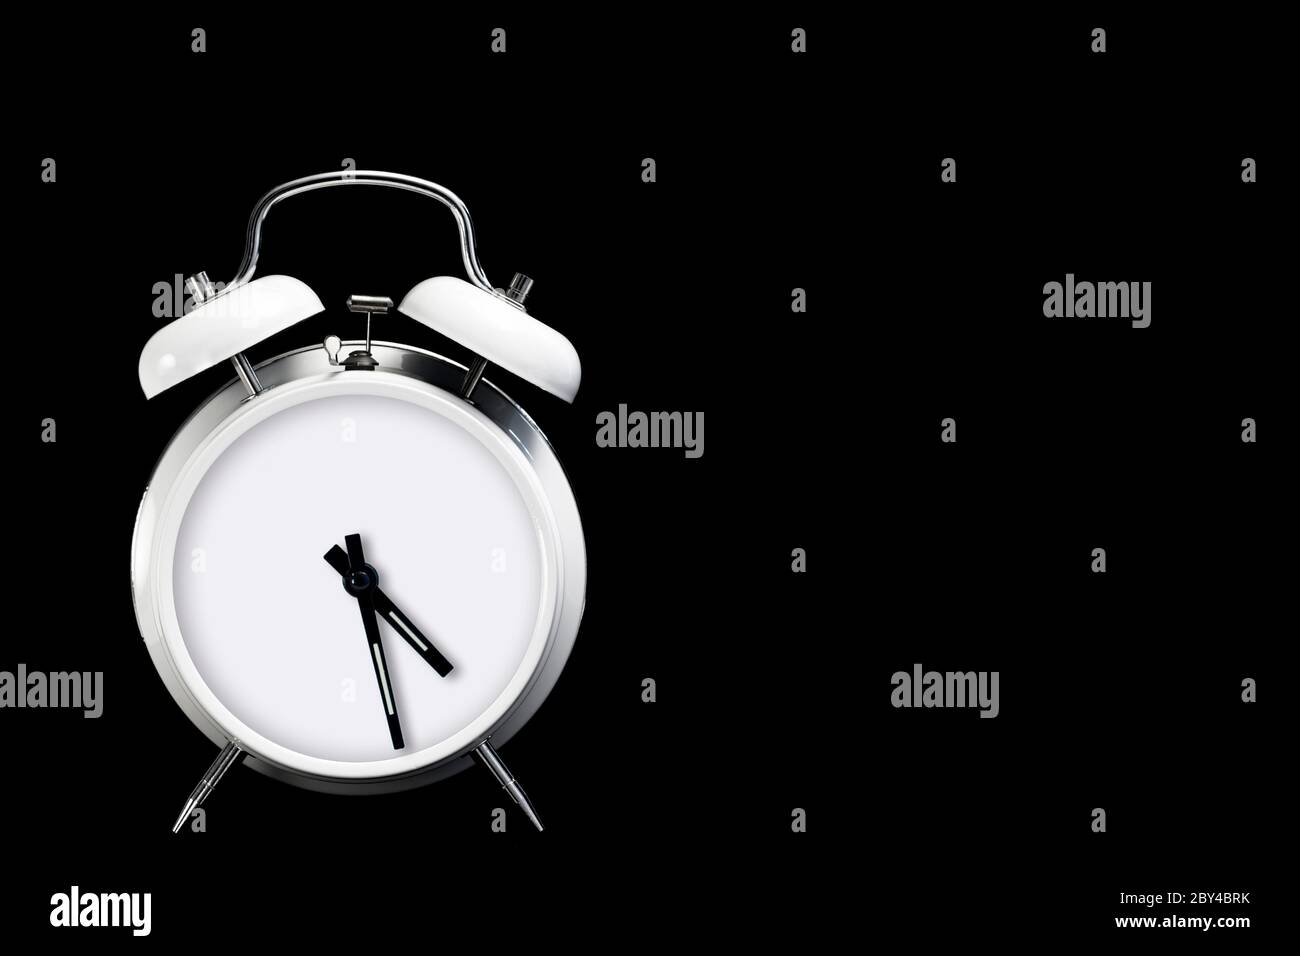 alarm clock without numbers isolated on black background with copy space Stock Photo